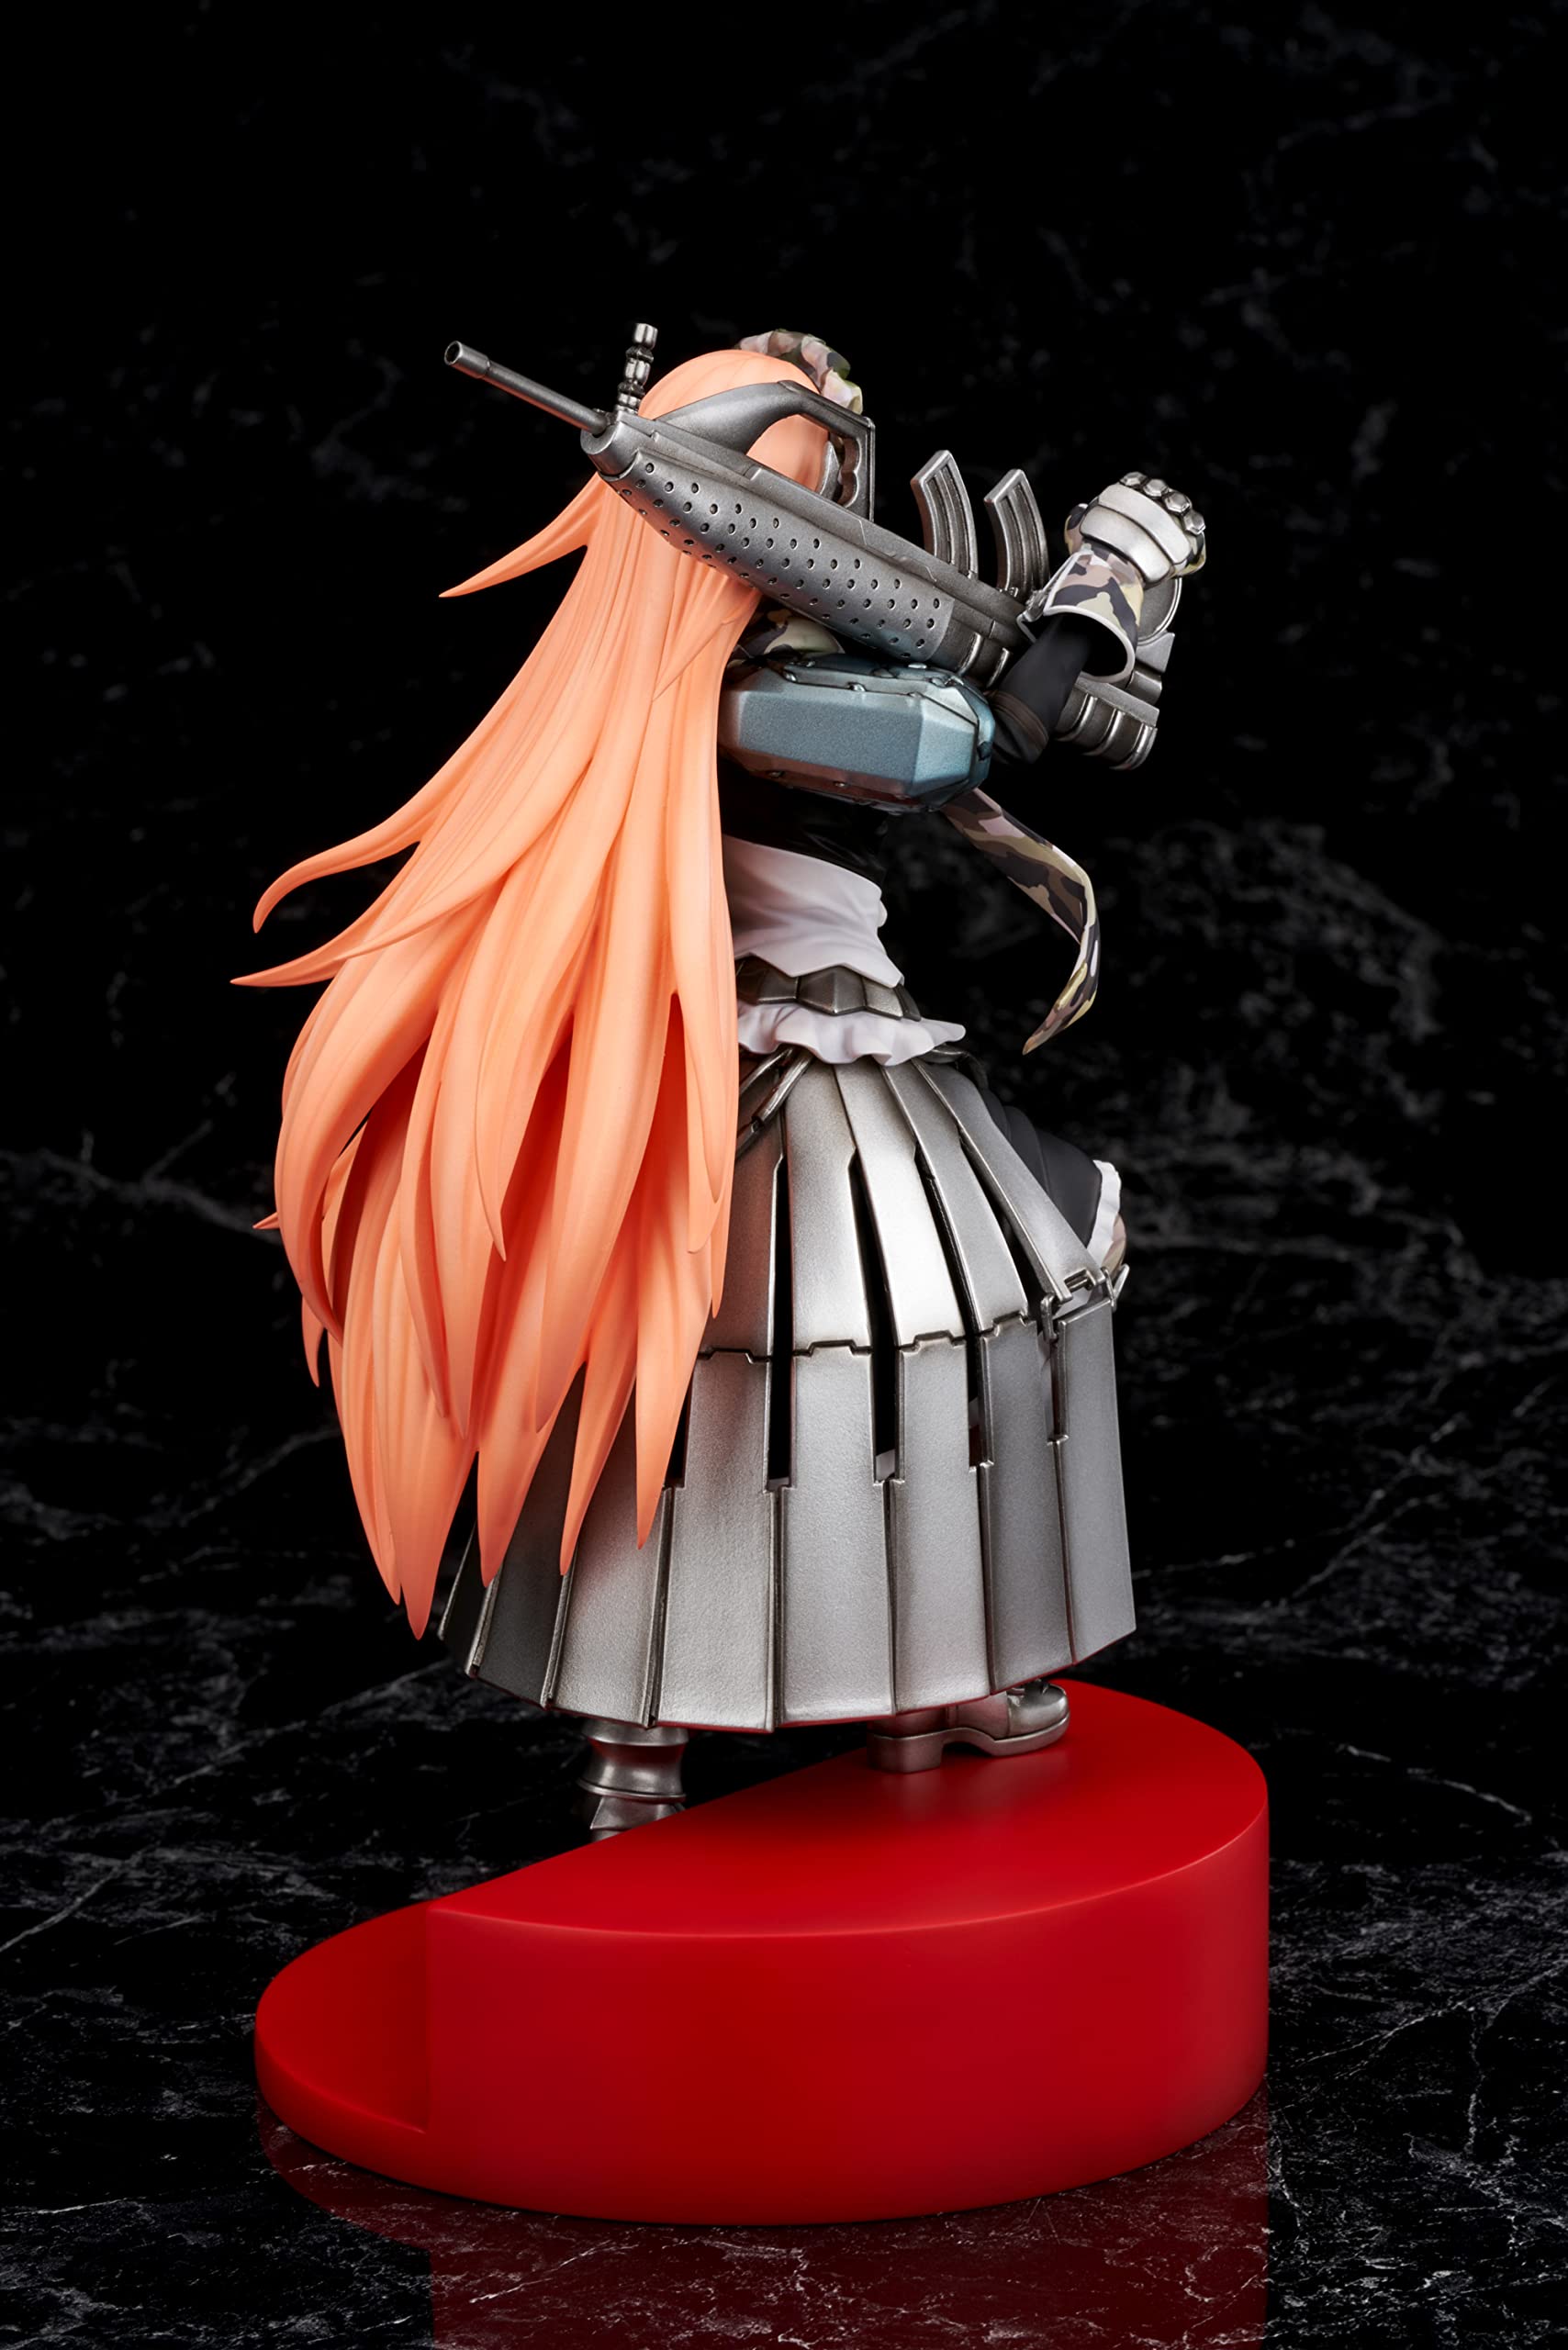 Good Smile Overlord: CZ2128 1:7 Scale PVC Figure